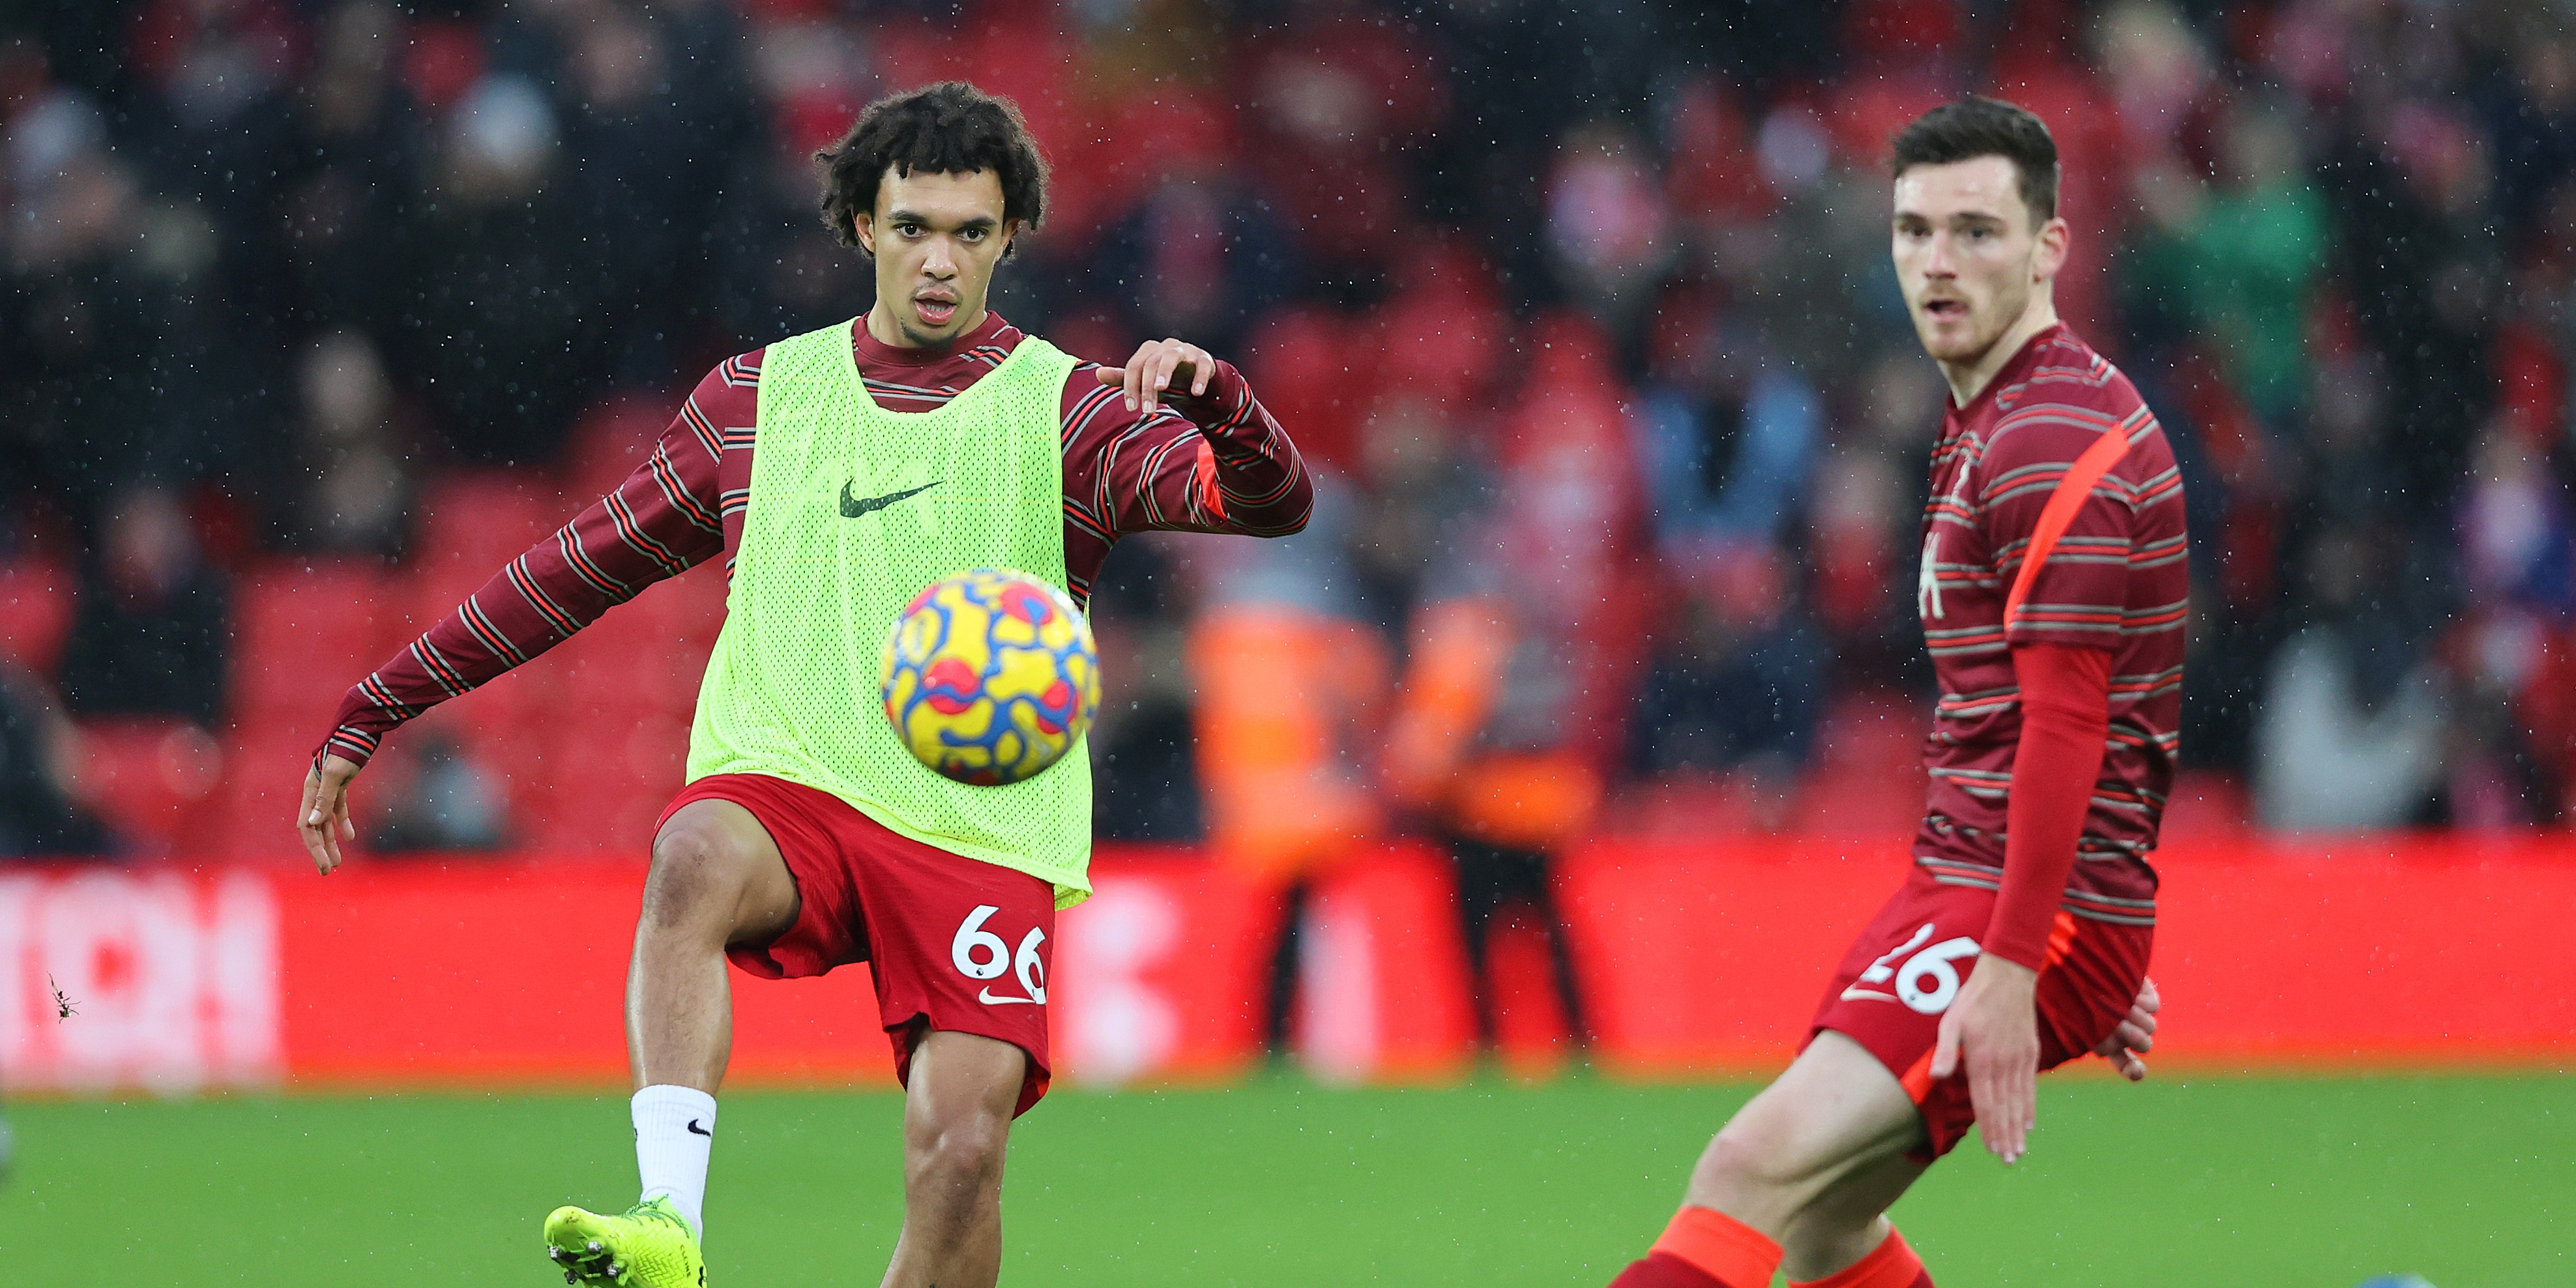 Liverpool fans will love Andy Robertson’s comment on Trent Alexander-Arnold’s Instagram post as our No. 66 relaxes during Premier League winter break